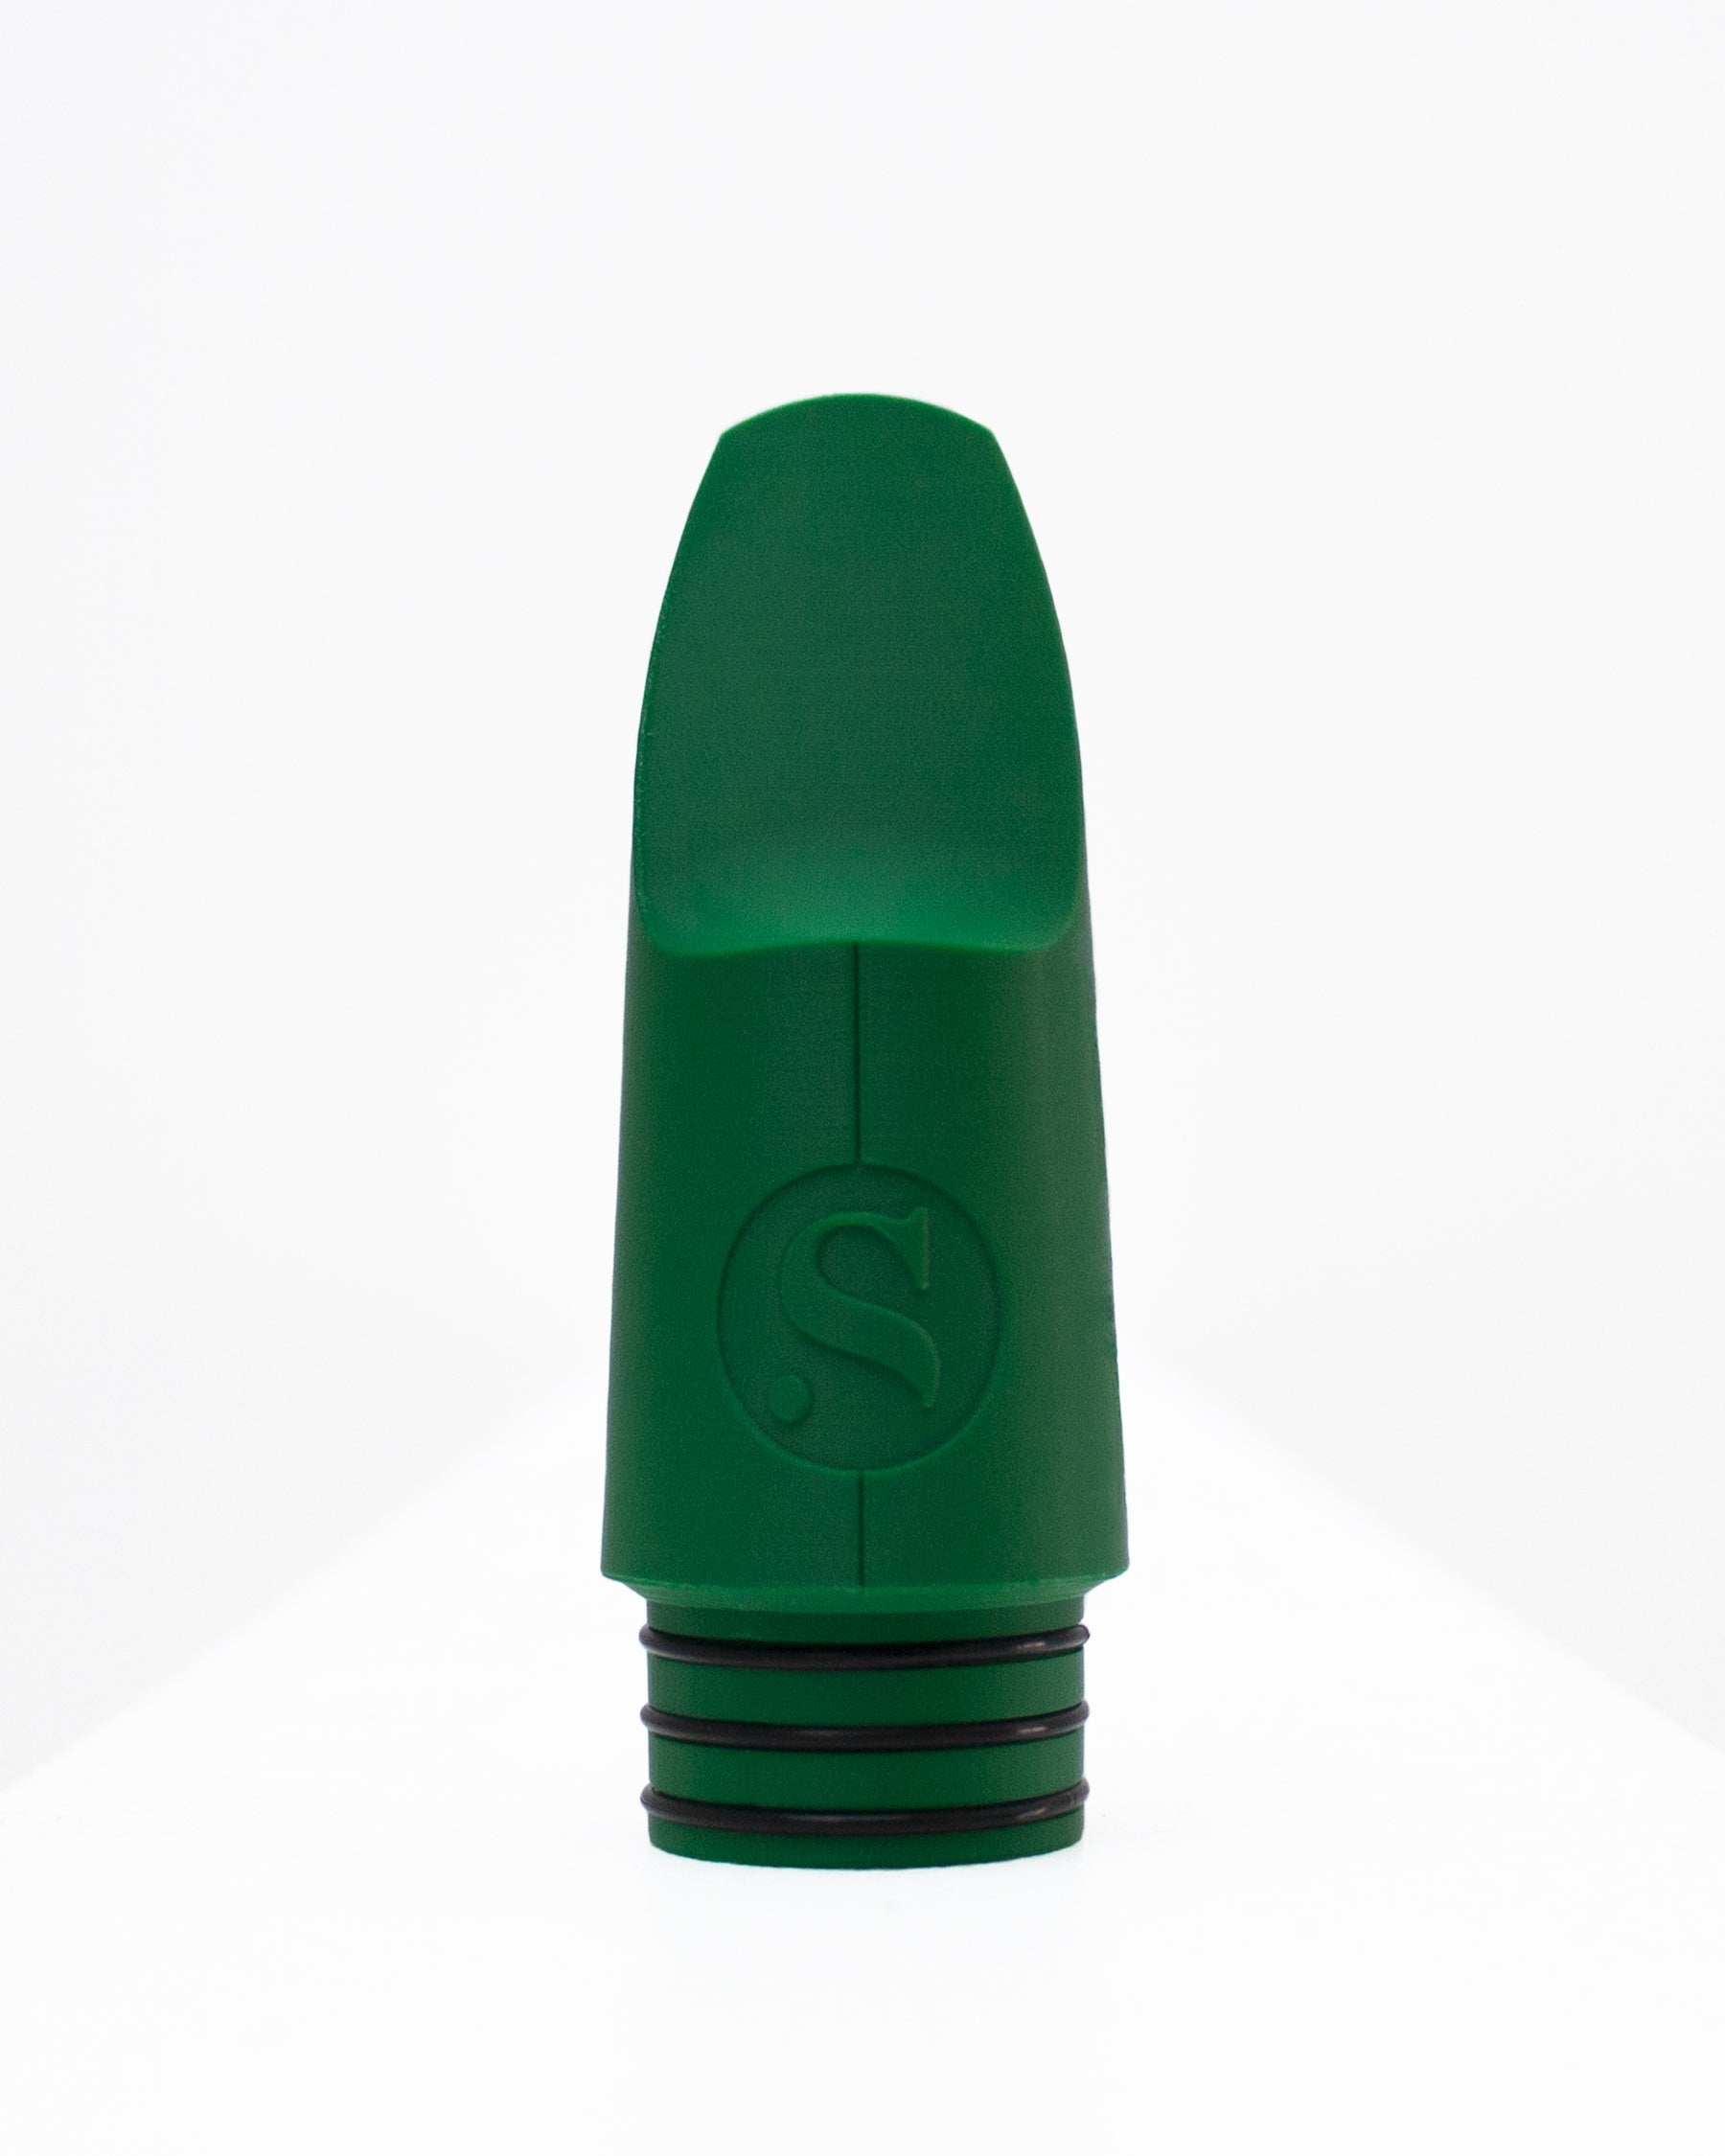 Bass Signature Clarinet mouthpiece - Daro Behroozi by Syos - Forest Green